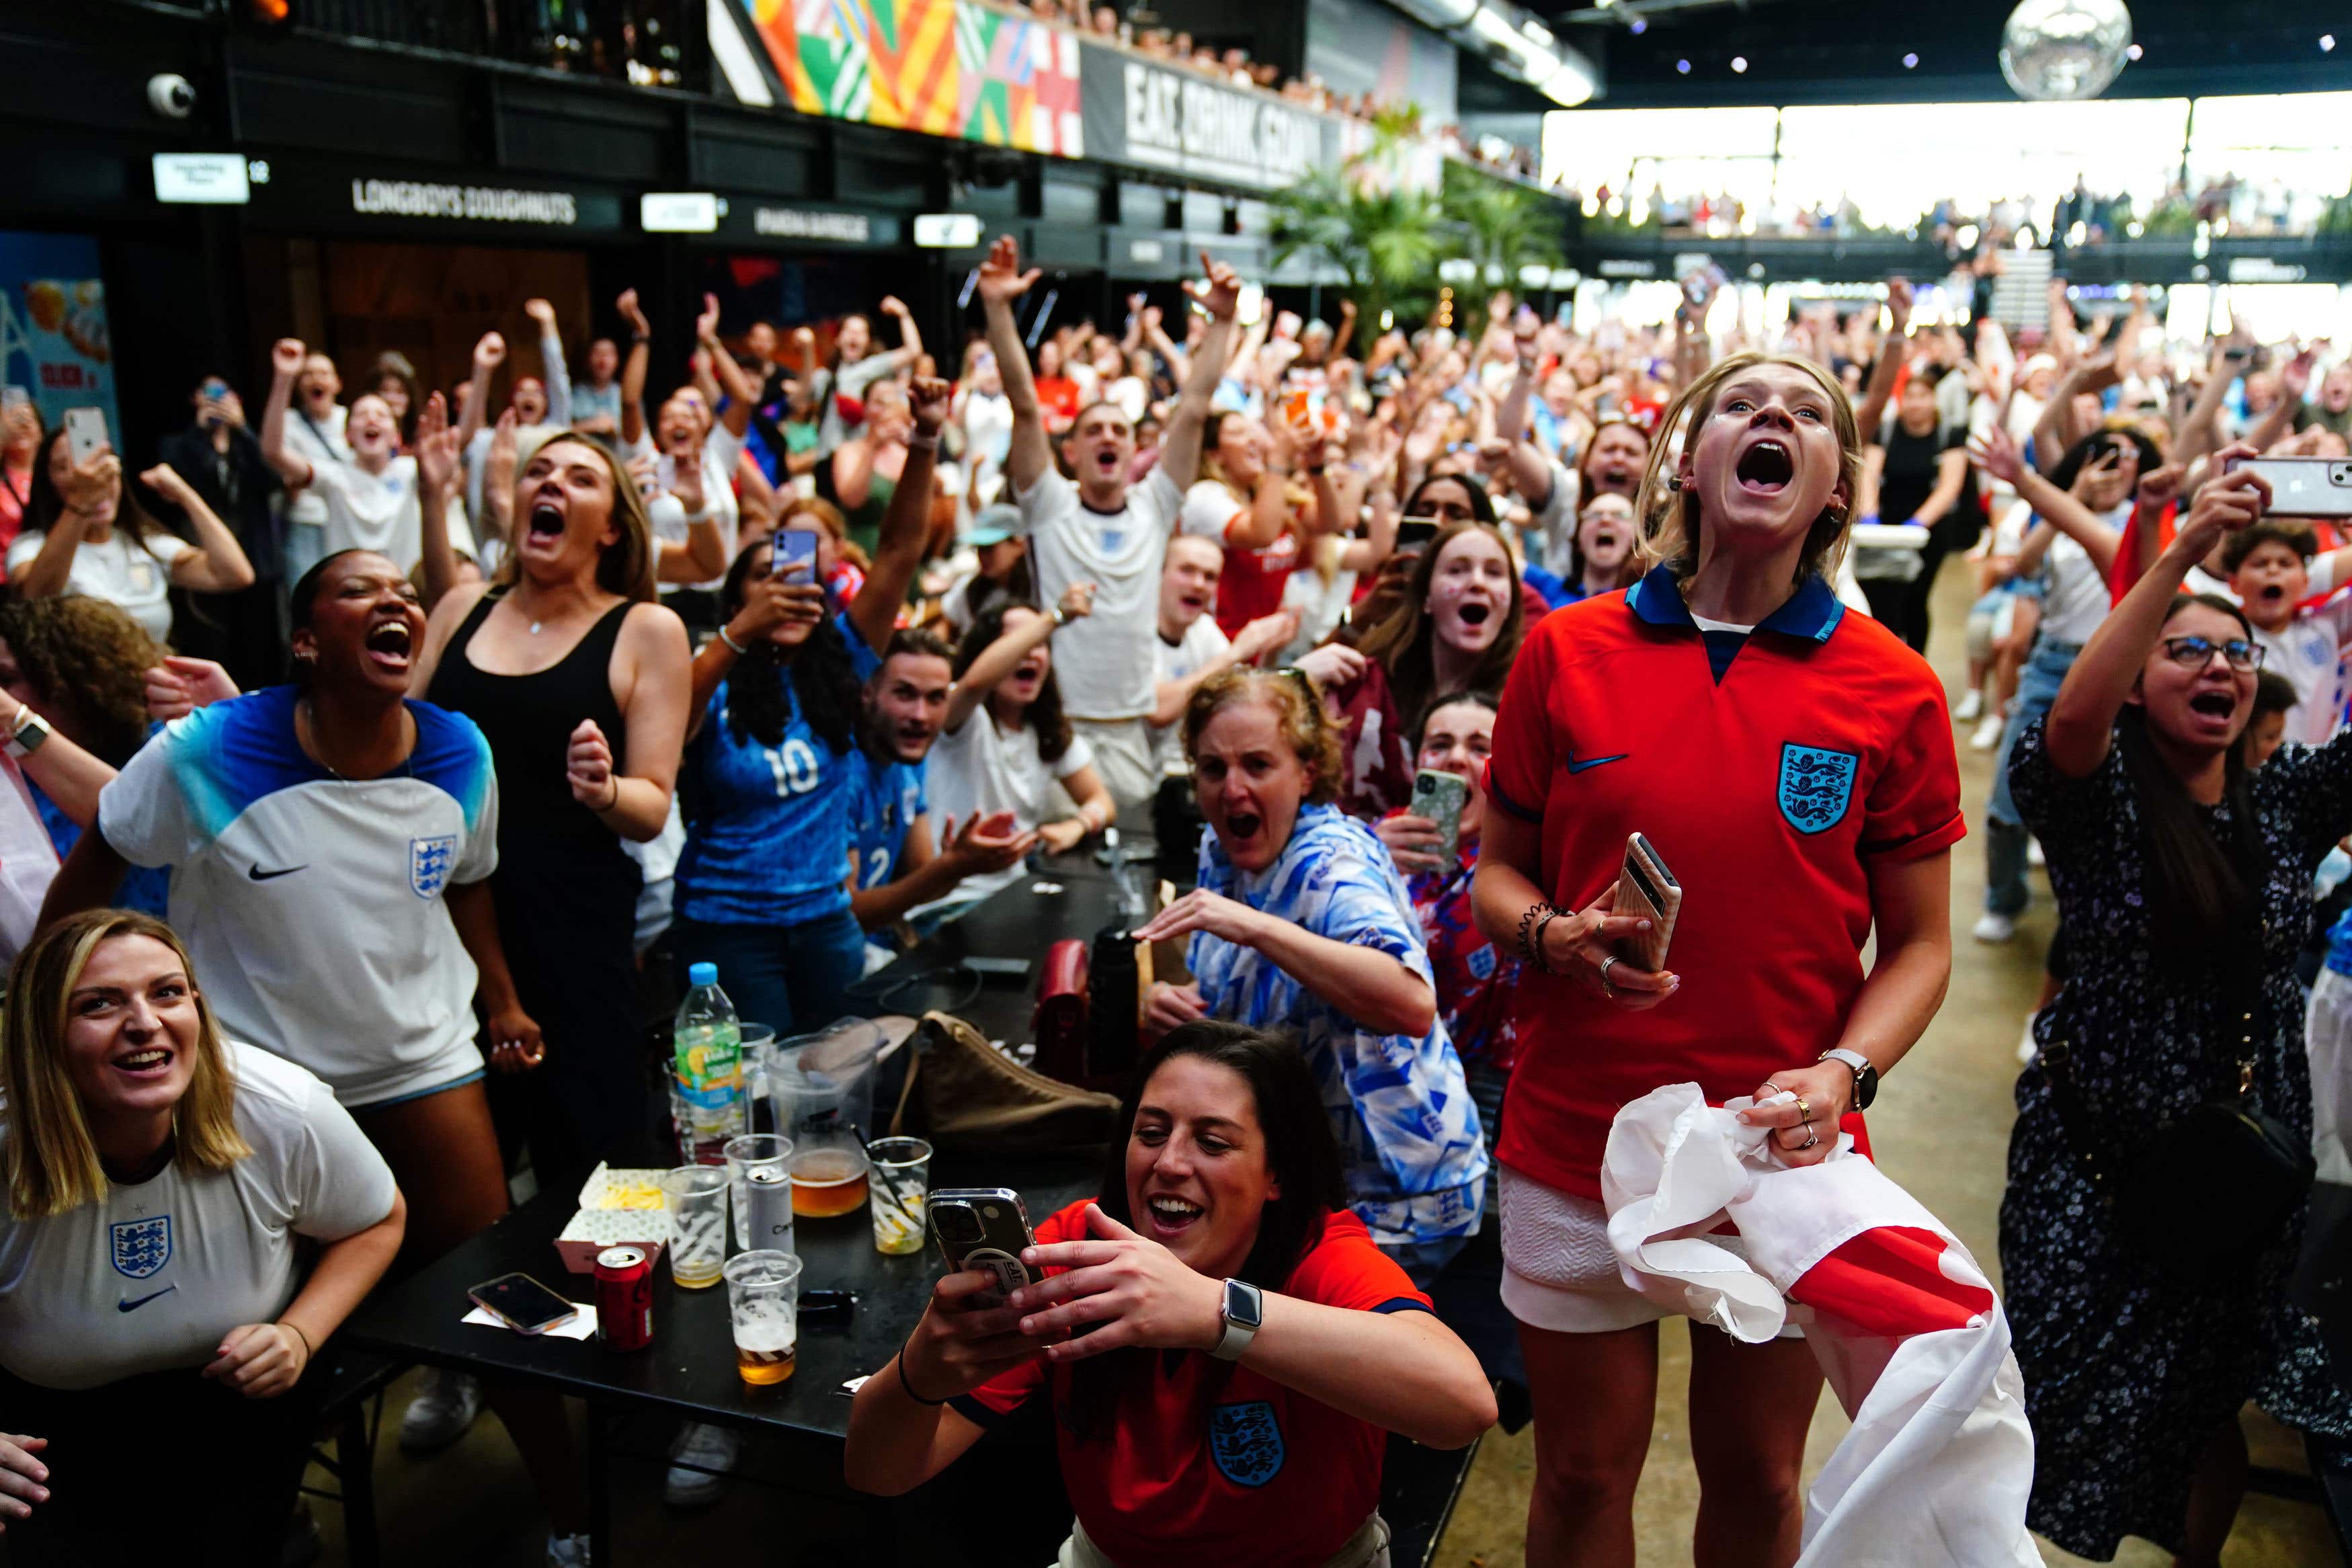 Pub bosses have called on the Government to loosen licensing rules for Sunday opening hours and alcohol sales for the World Cup final (Victoria Jones/PA)